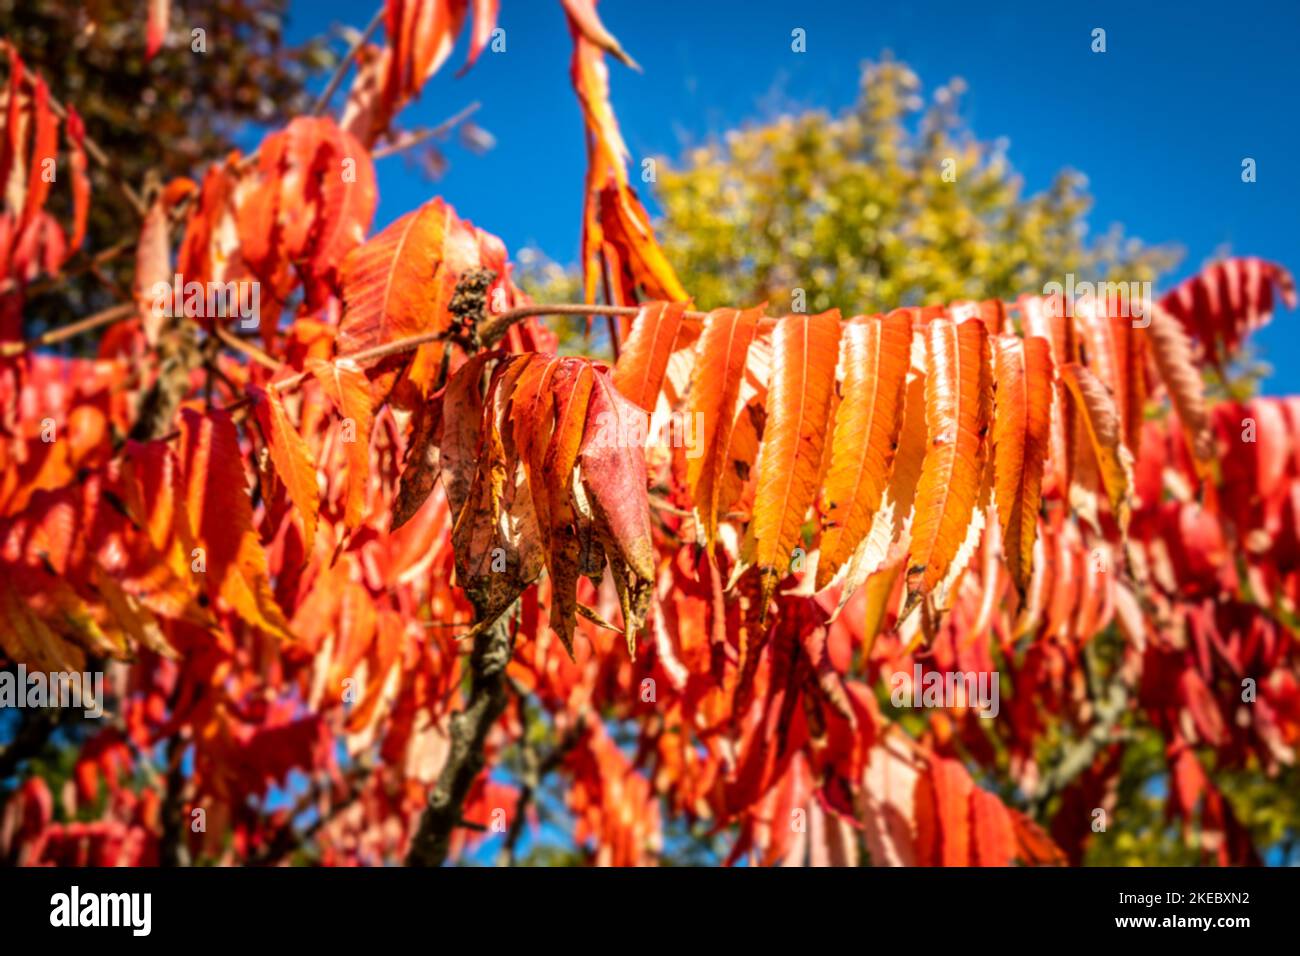 Brightly coloured red autumn leaves glowing in the sunshine Stock Photo